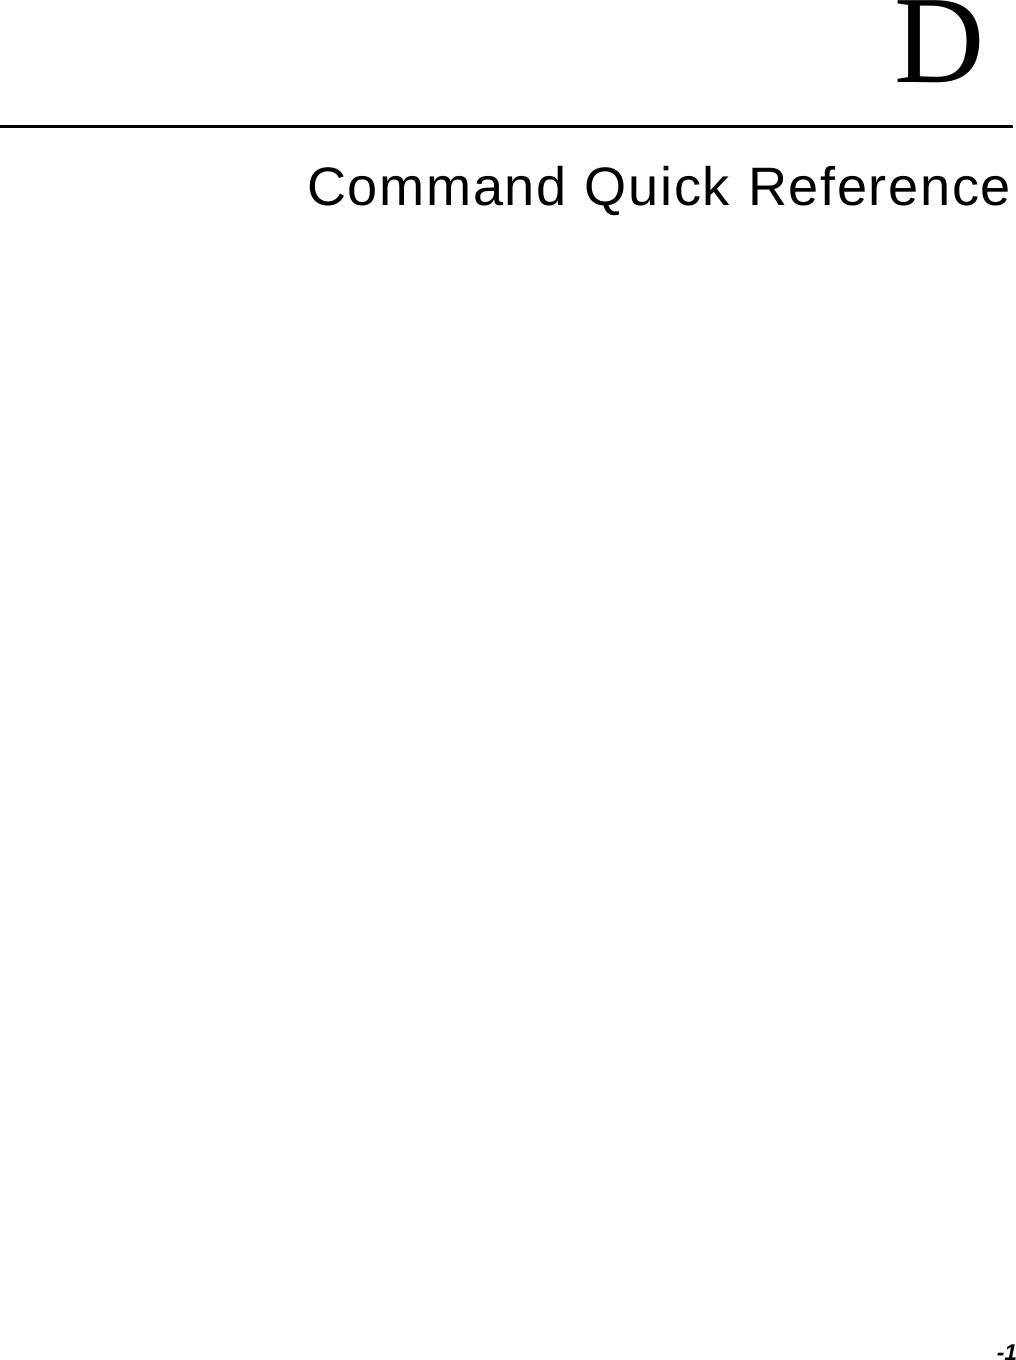 -1DCommand Quick Reference